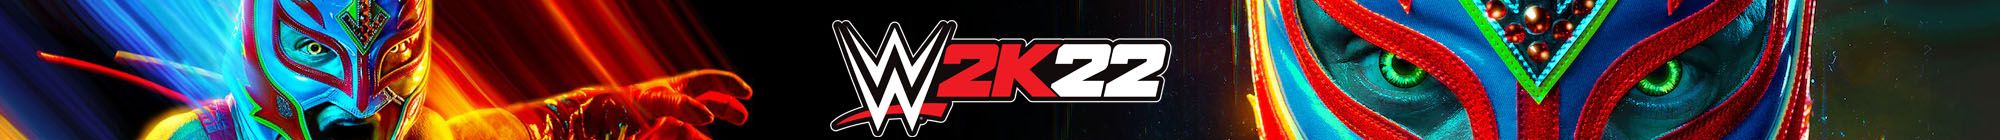 wwe-2k22-complete-guide-banner